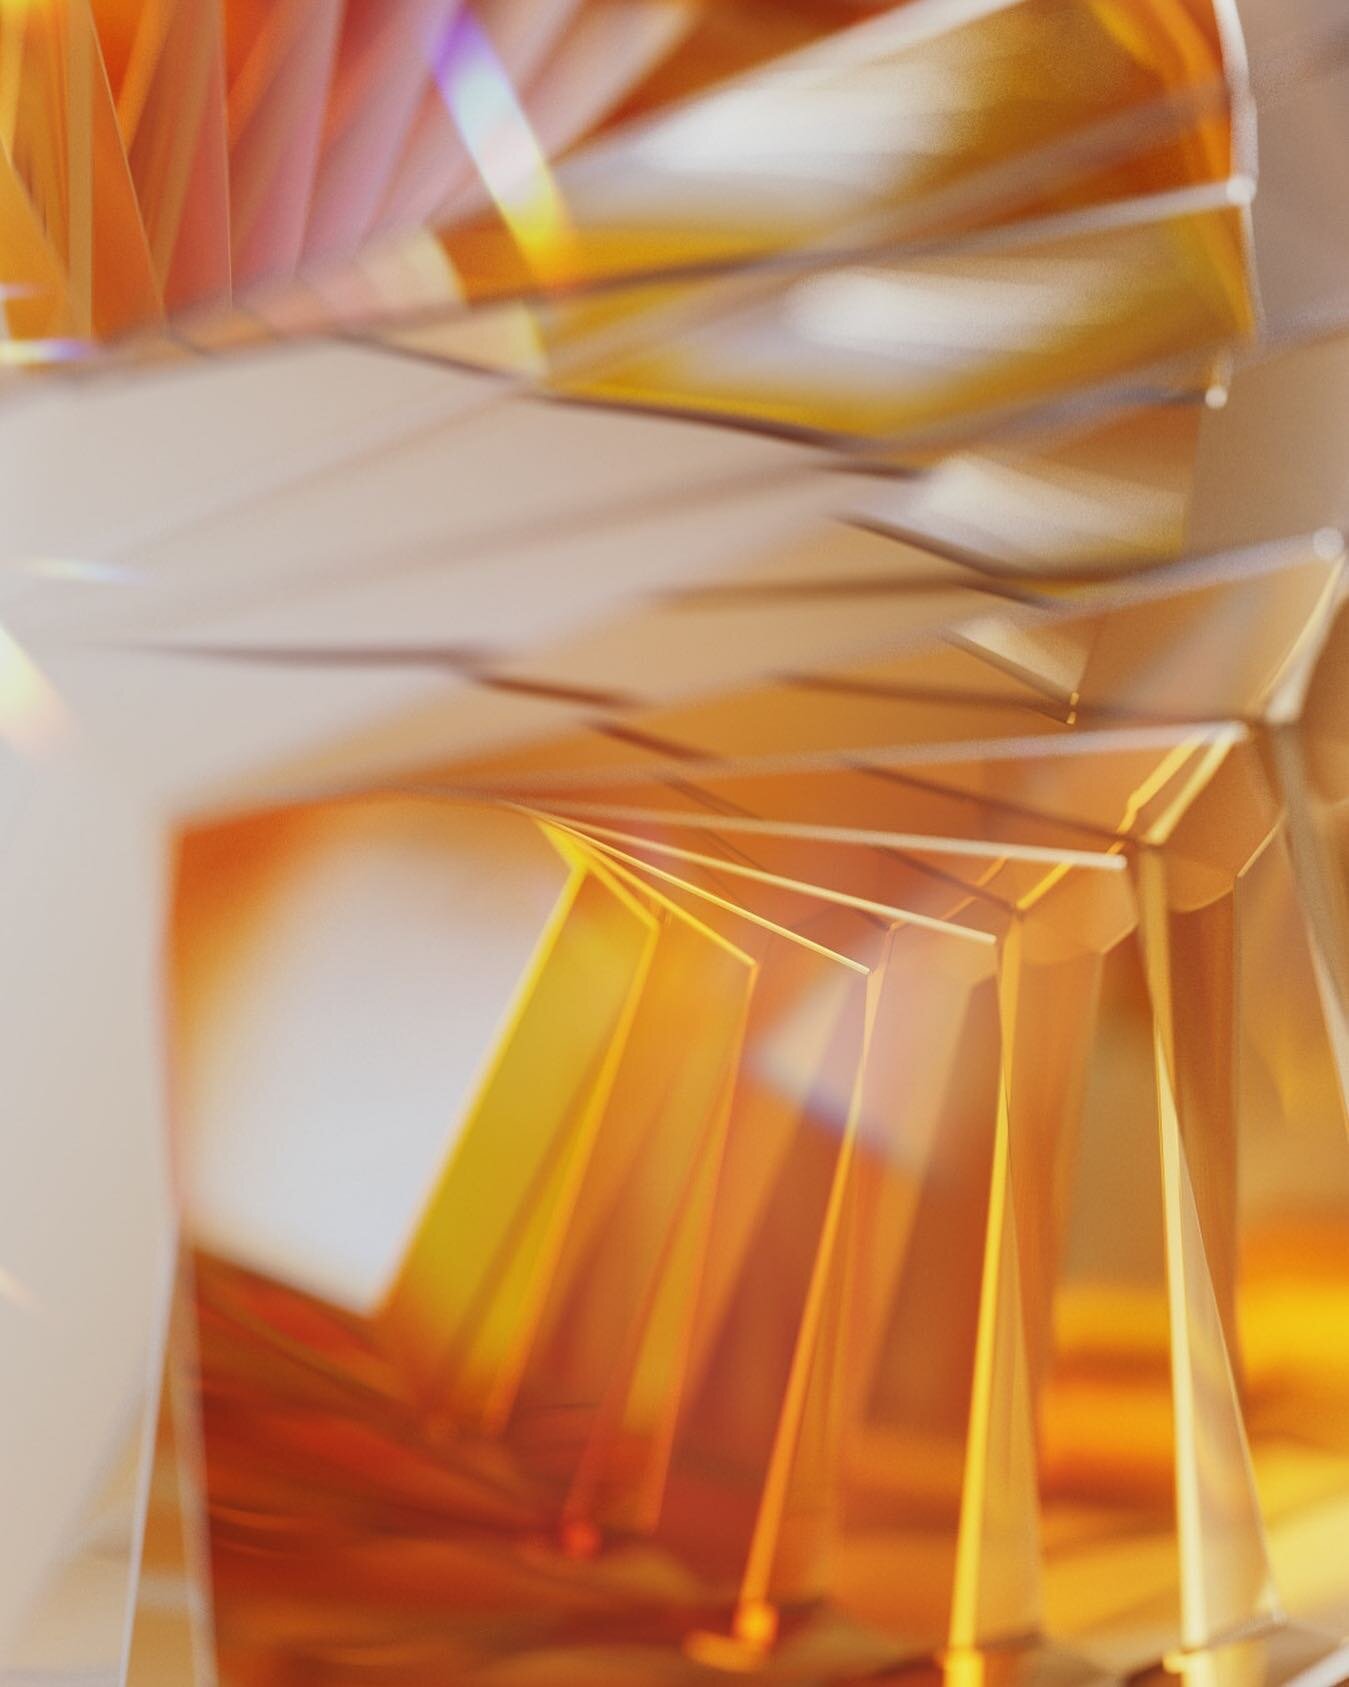 Prism Glass.
R&amp;D
.
.
.
#sidefxhoudini #redshiftrender #motiongraphics #prismacolors #lineas #vidreo #amber #motiongraphics #motiondesignerscommunity